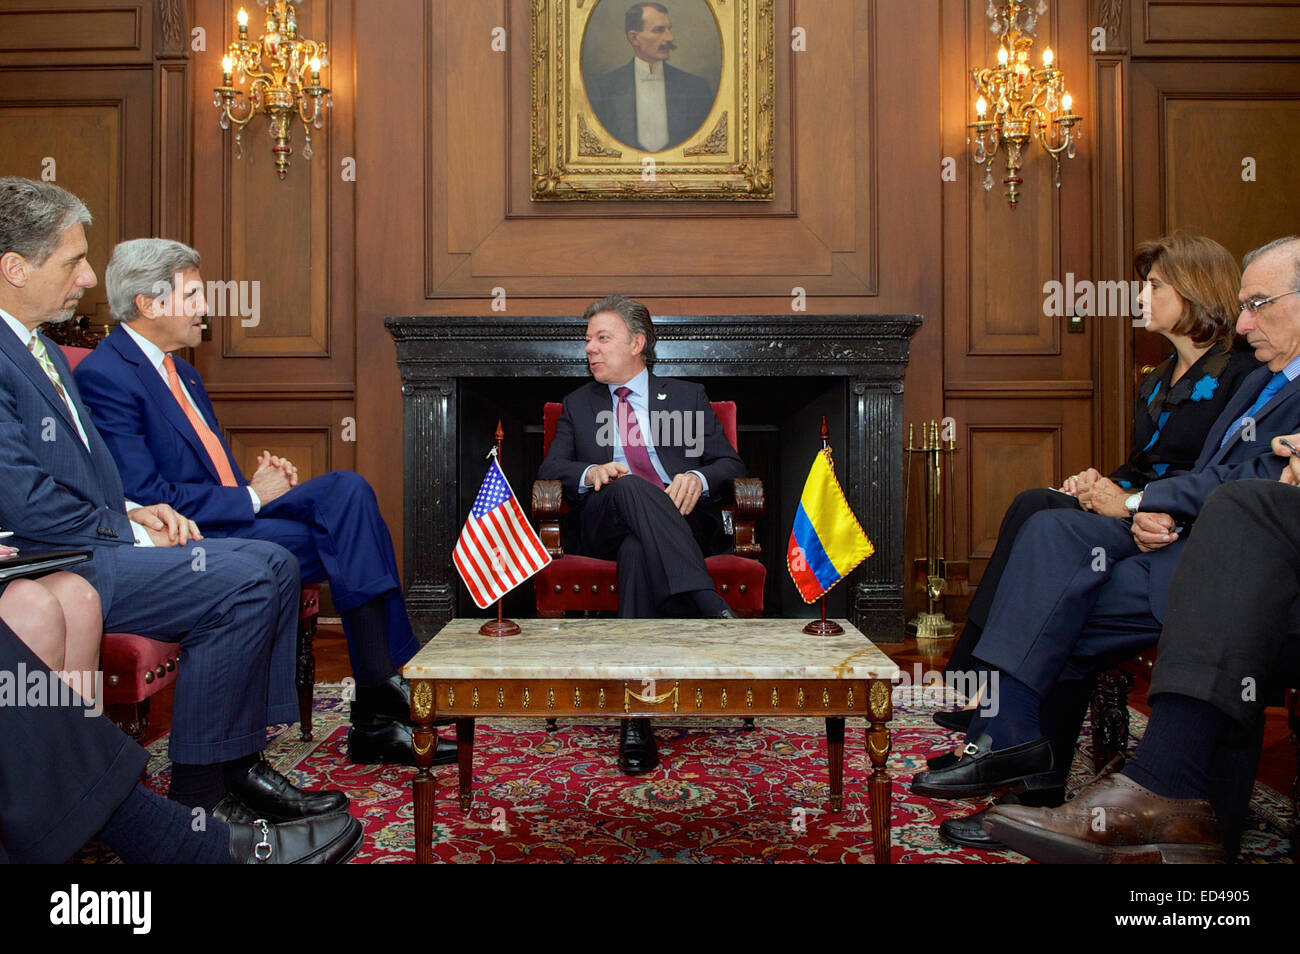 Colombian President Juan Manuel Santos chats with U.S. Secretary of State John Kerry and U.S. Ambassador to Colombia Kevin Whitaker, seated across from Colombian Foreign Minister Maria Angela Holguin and lead FARC peace negotiator Humberto de la Calle before they begin a bilateral meeting at the Casa de Narino Presidential Palace in Bogota, Colombia, on December 12, 2014. Stock Photo